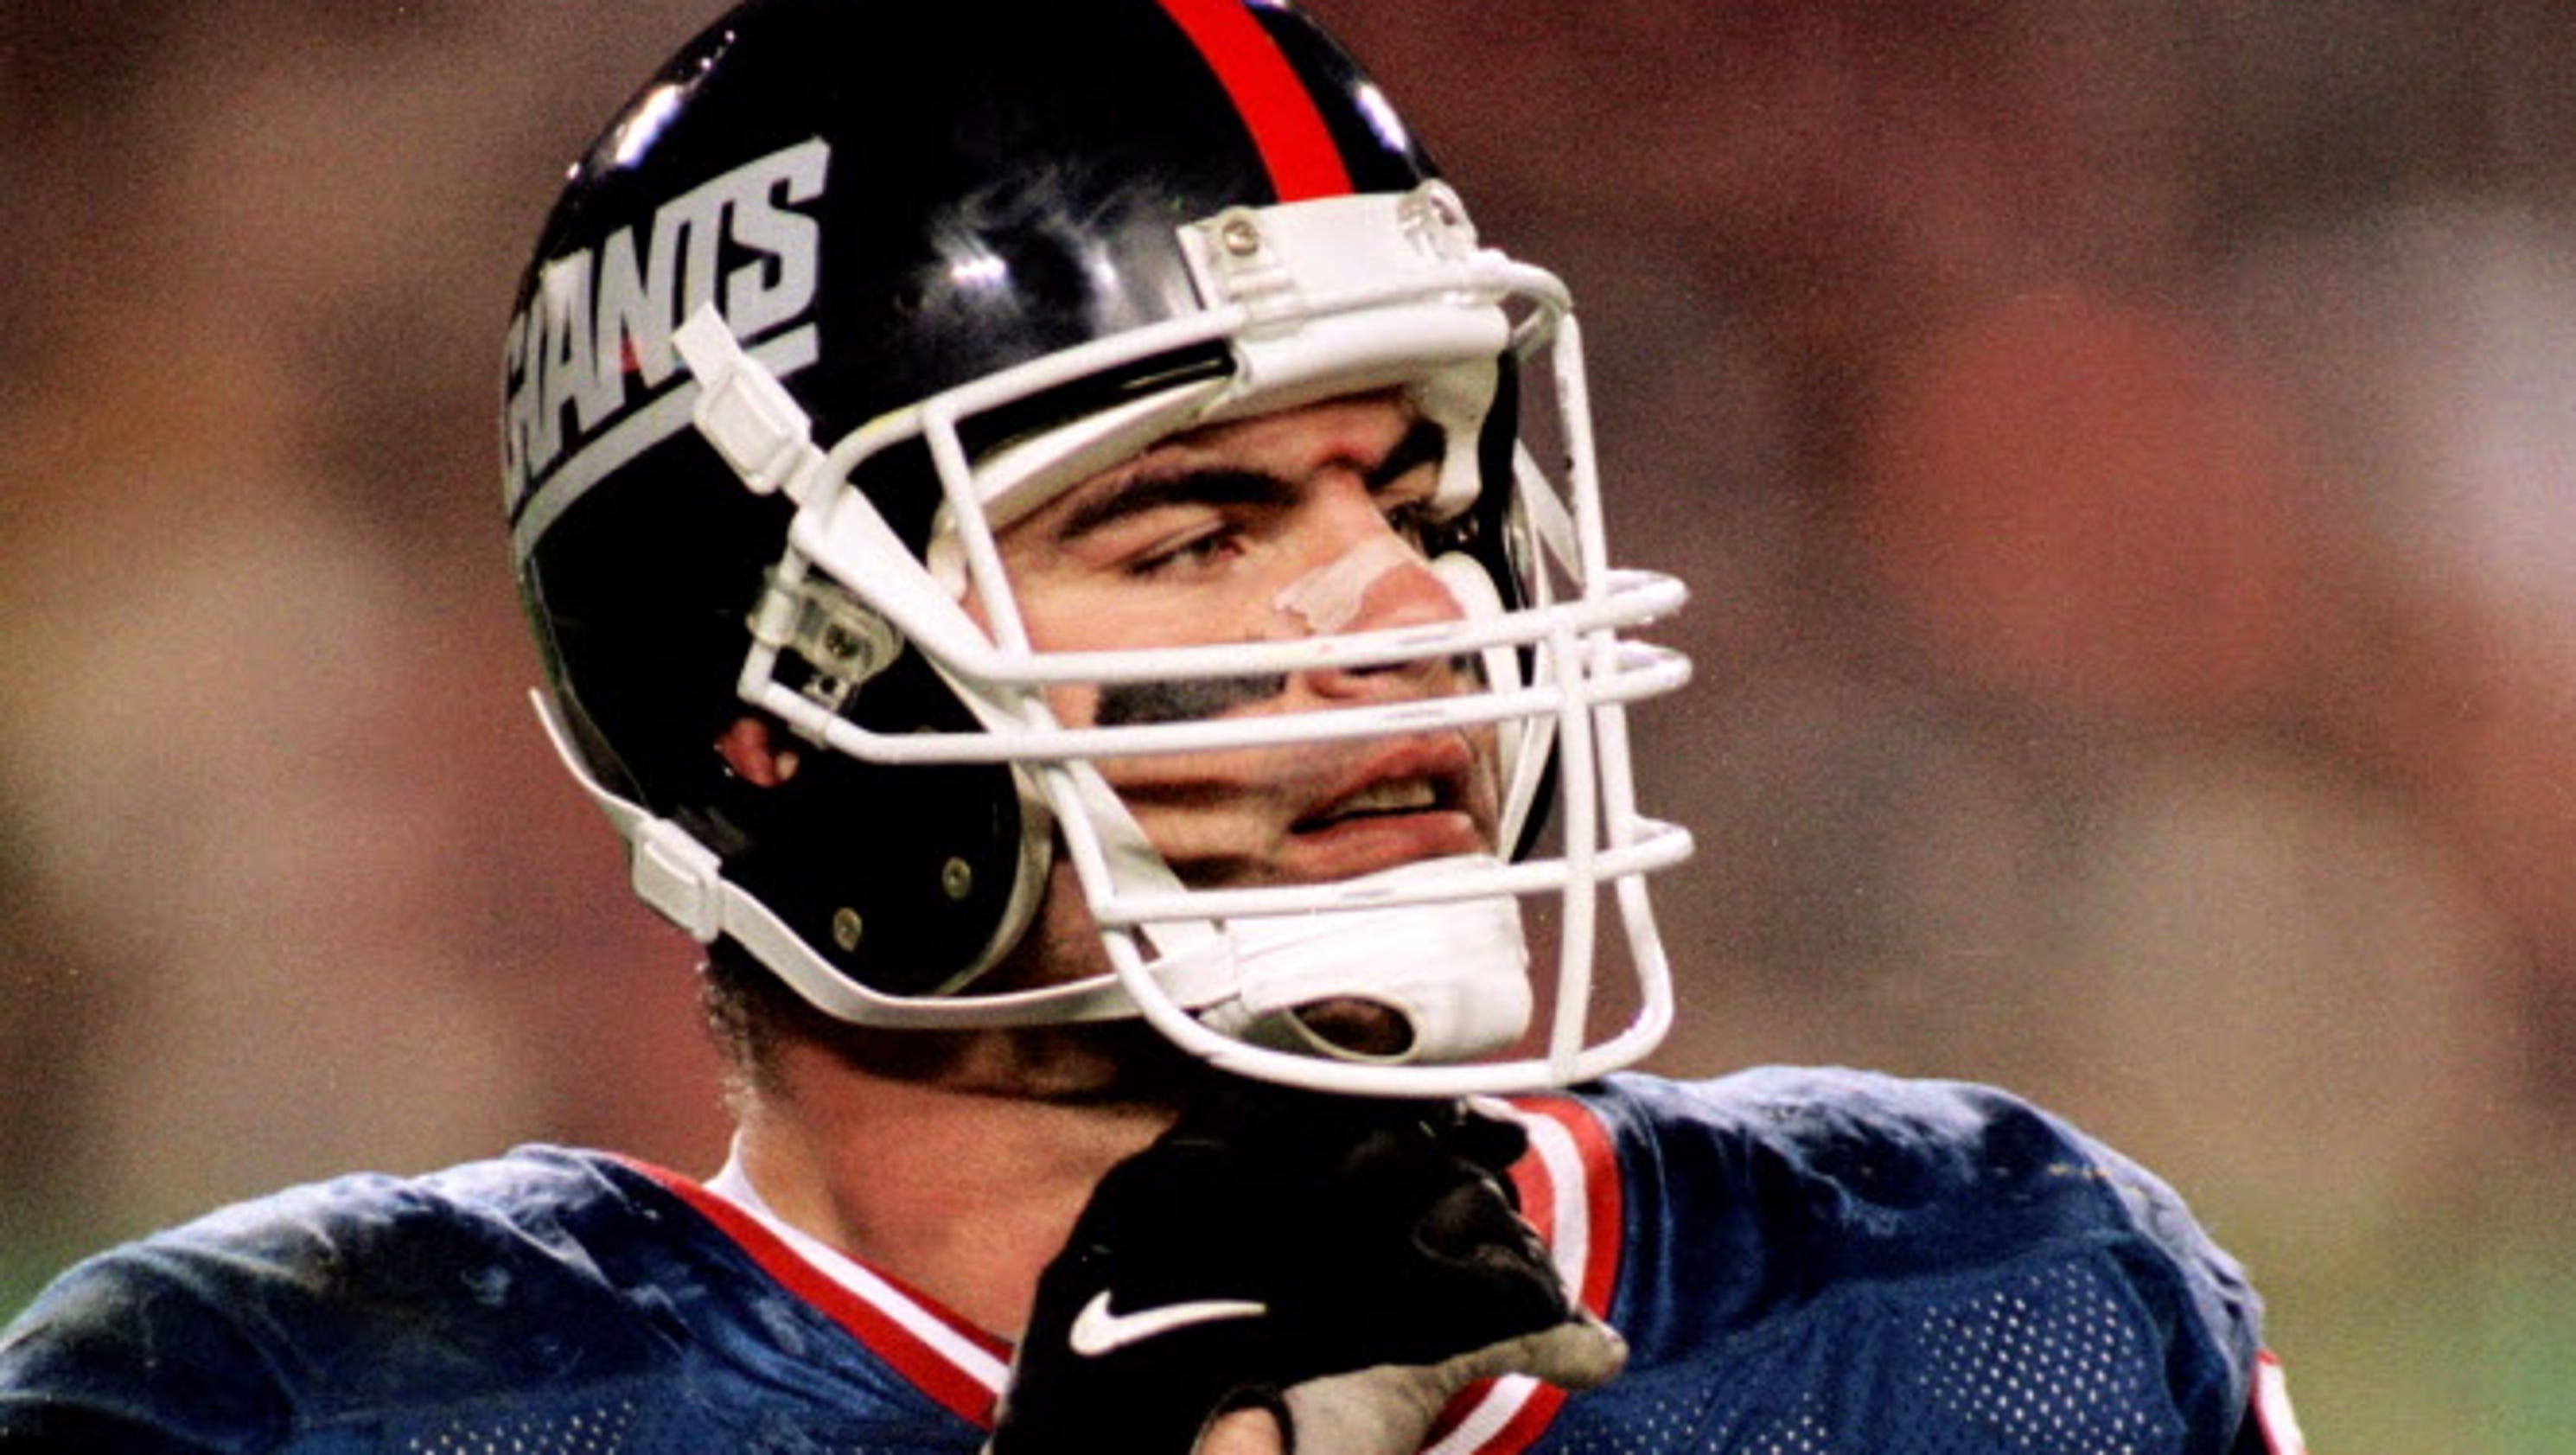 Former New York Giants LB Corey Widmer declines Montana Football Hall of Fame nomination